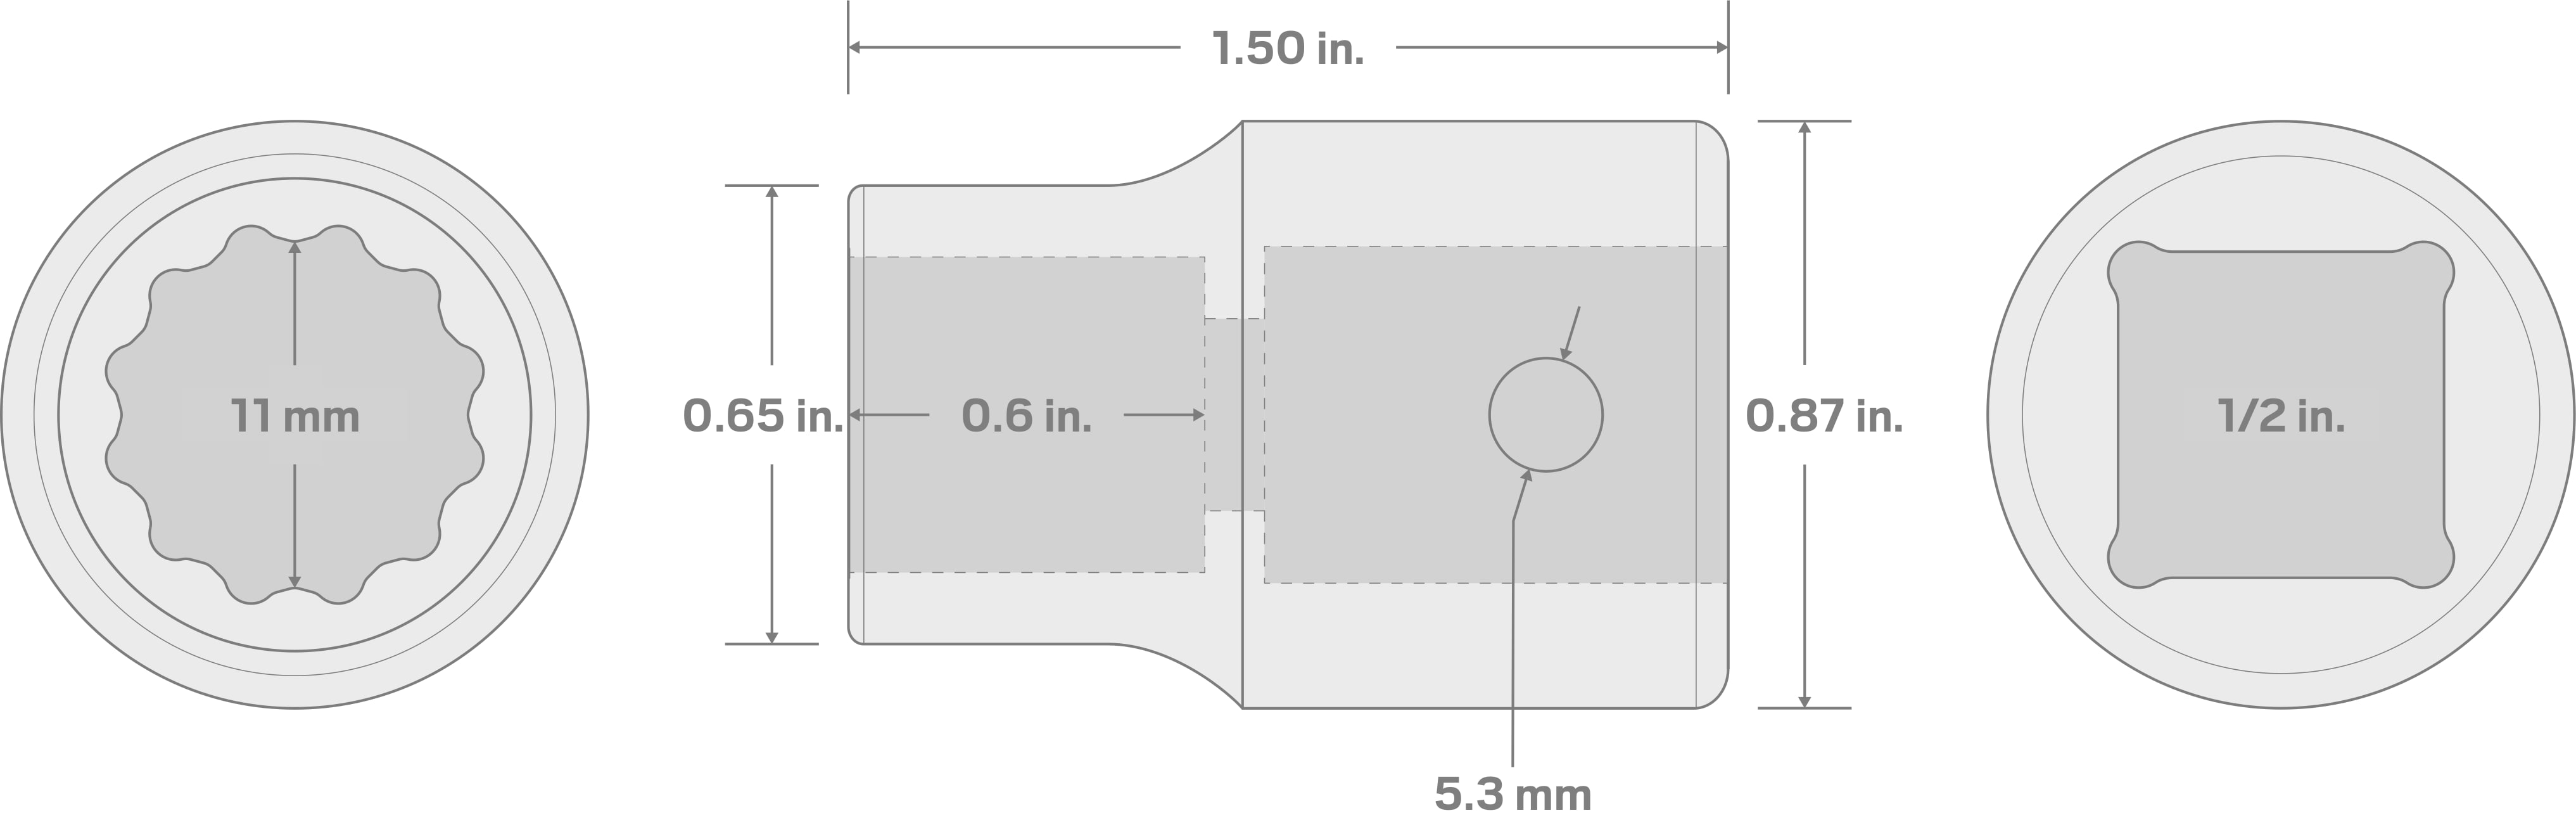 Specs for 1/2 Inch Drive x 11 mm 12-Point Impact Socket